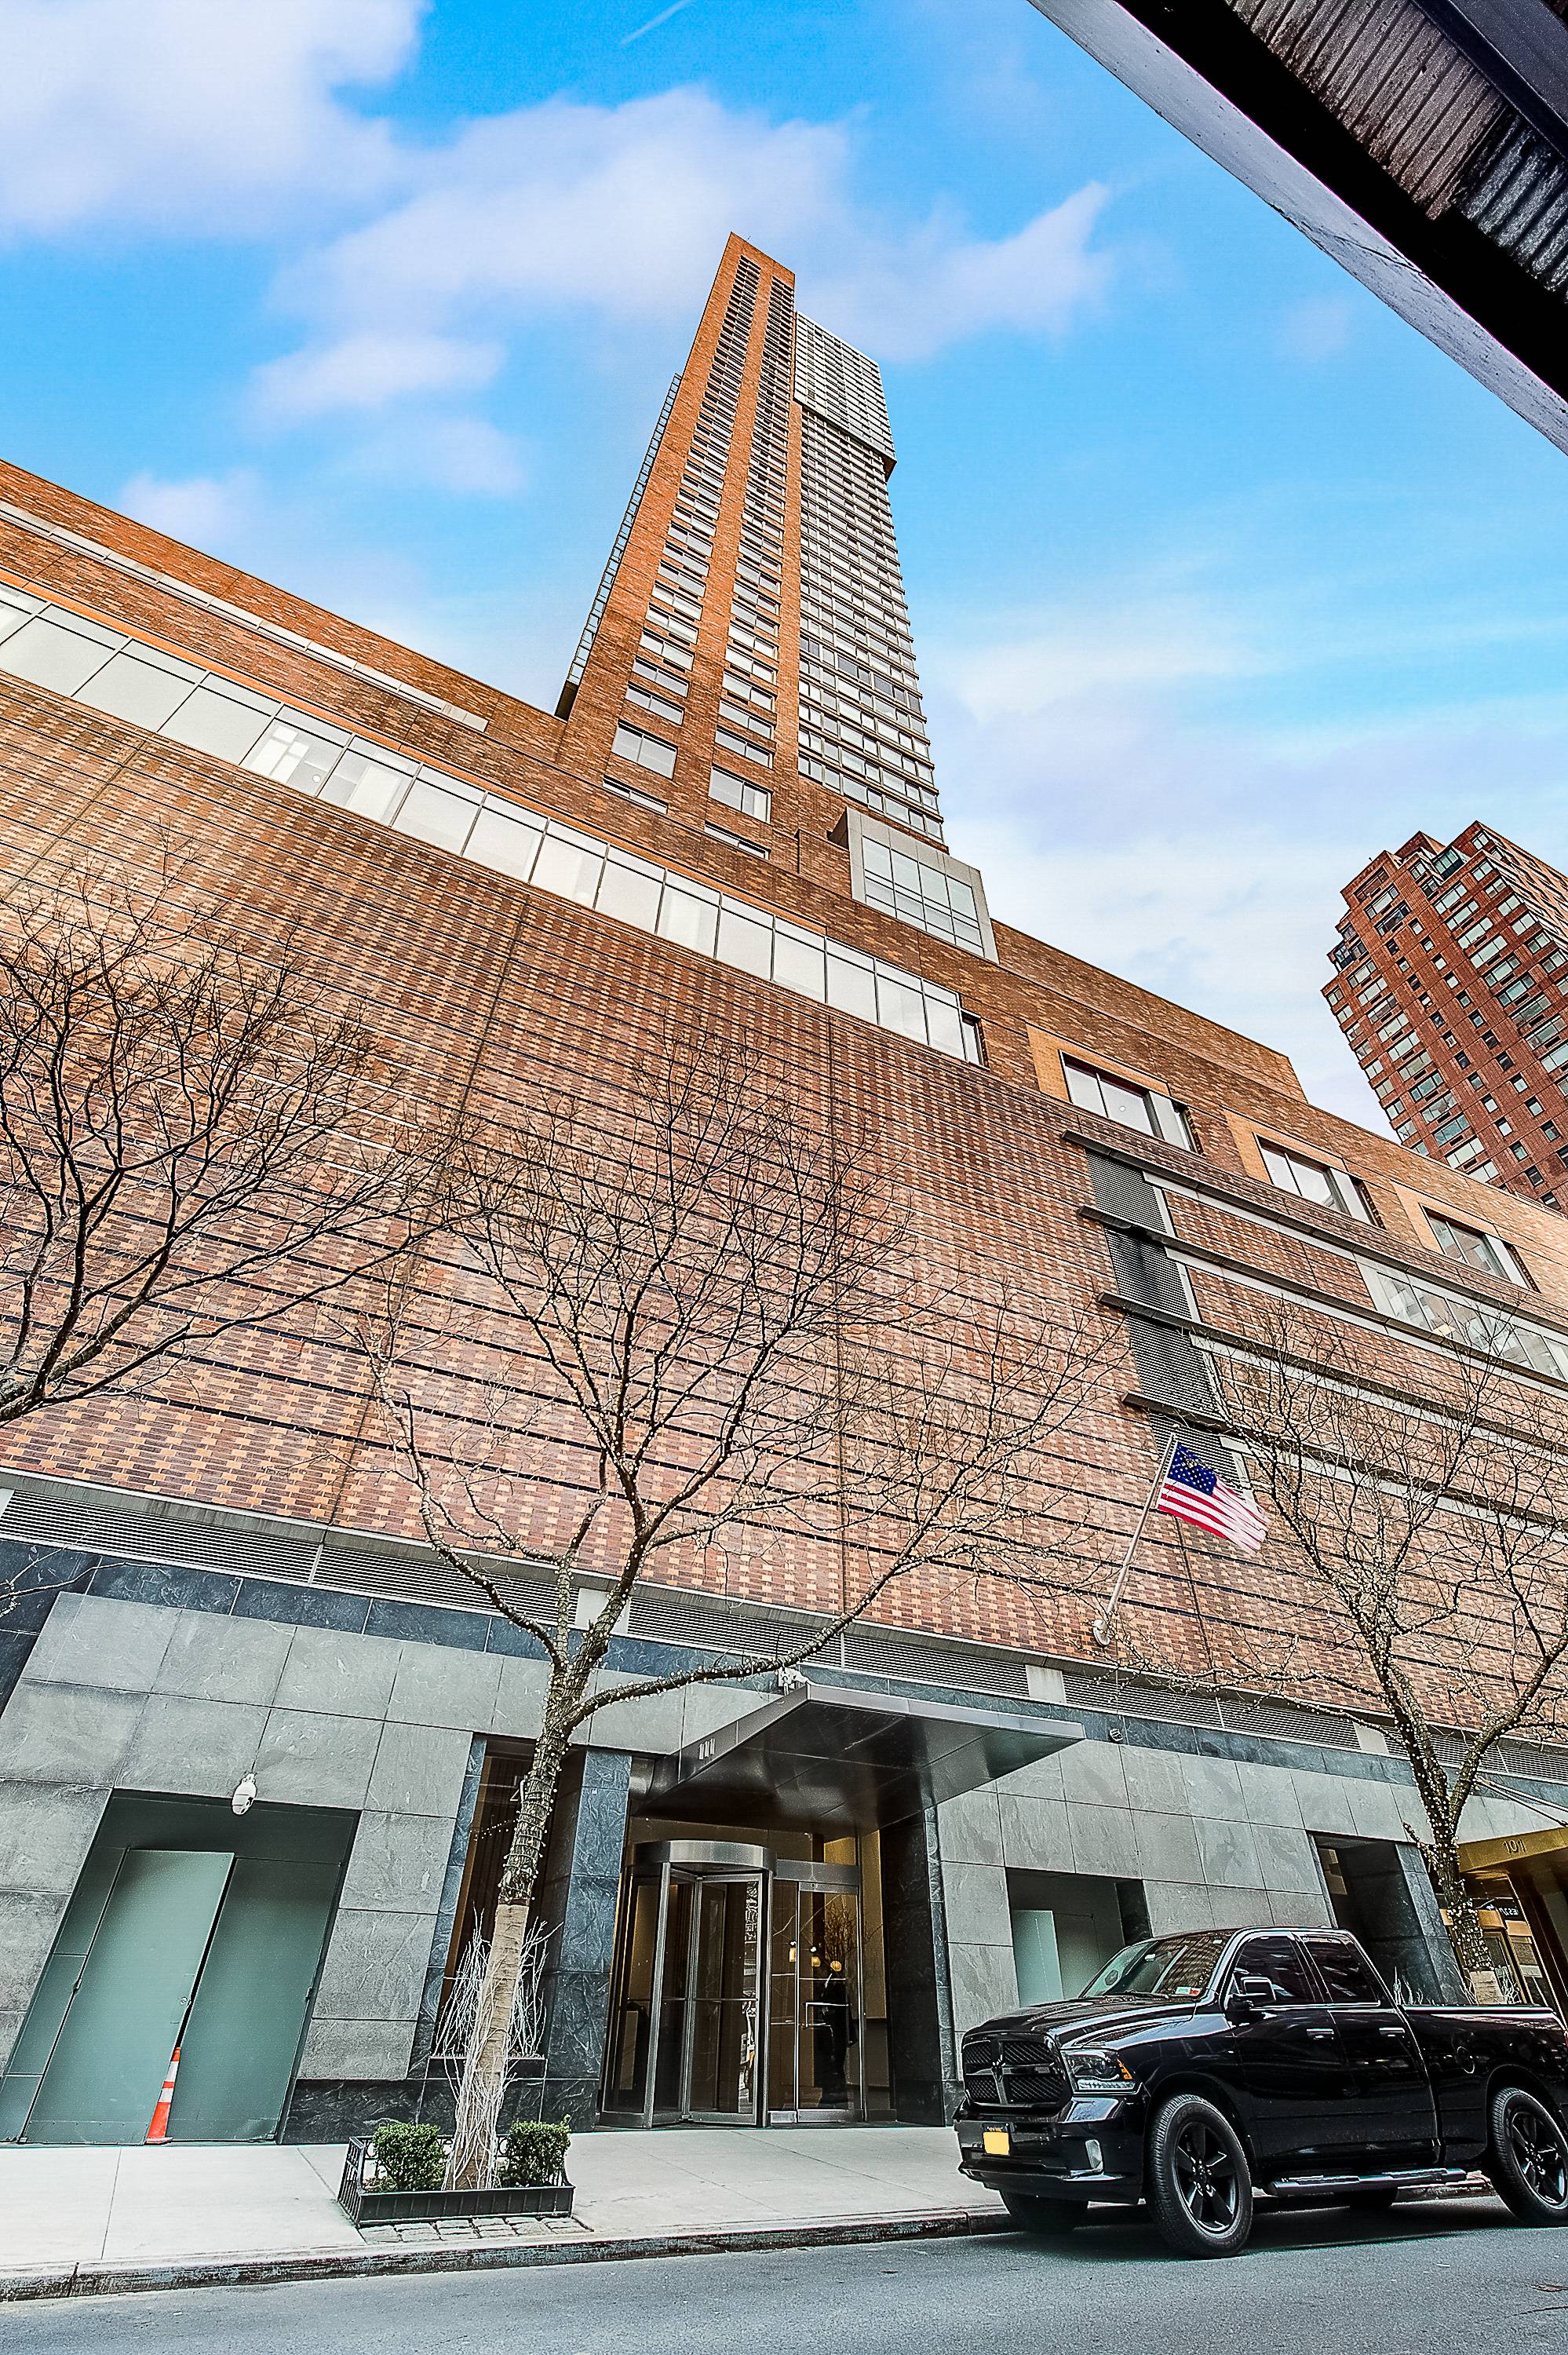 to Park Millennium. This timeless modern classic residential condominium at the cusp of the Upper West Side's Historic District, is located on arguably the most beautiful, architecturally attractive, seasonally lit, ...